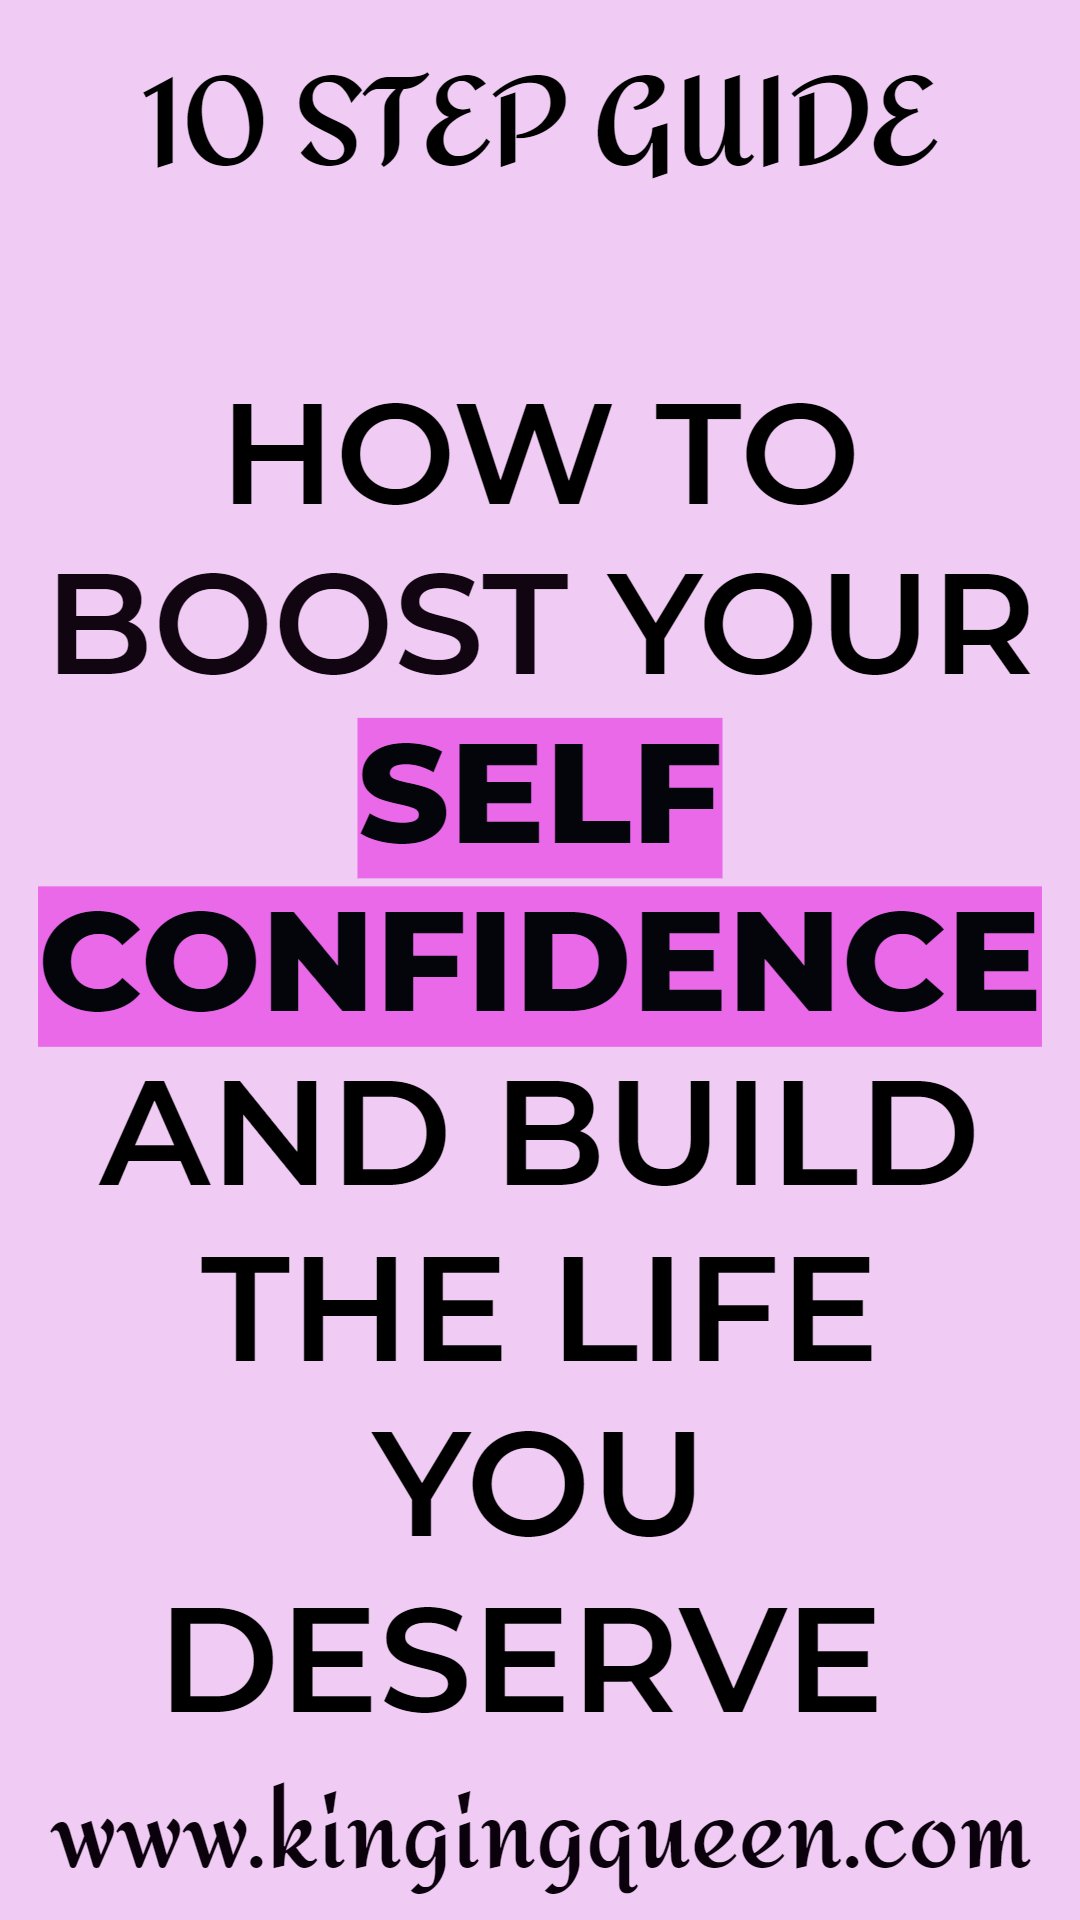 How to boost self confidence